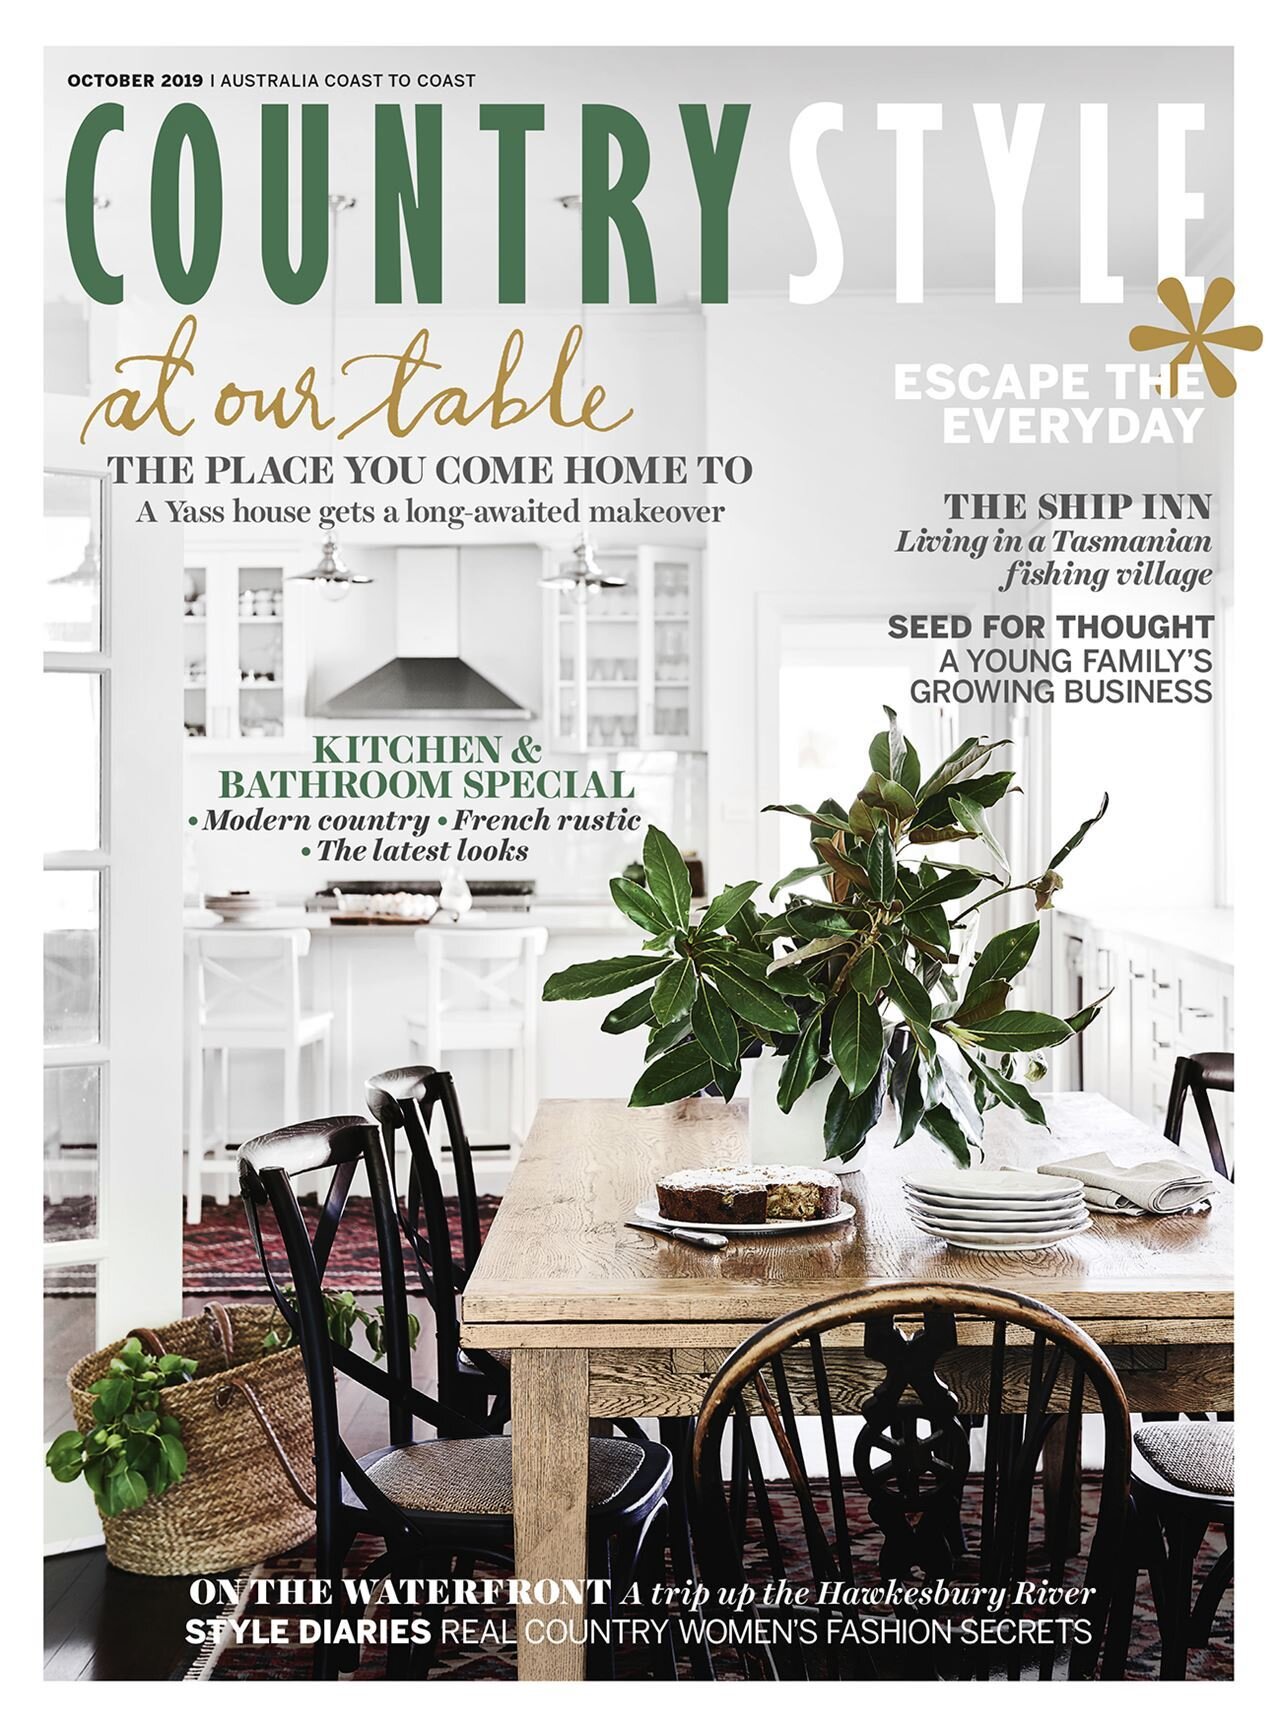 TOP OF THE SHOPS | COUNTRY STYLE